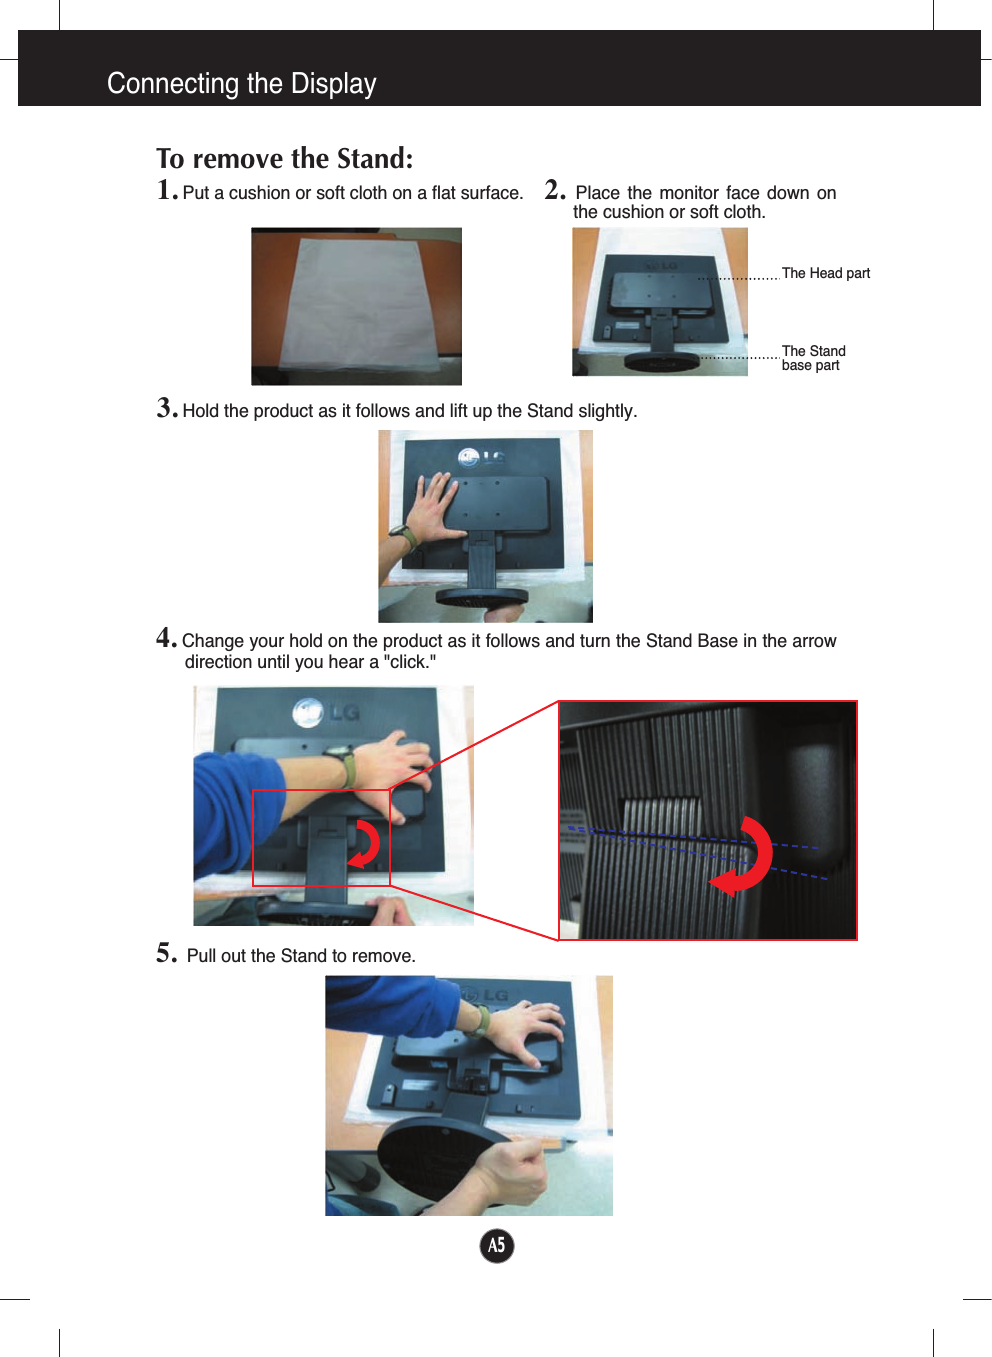 A5Connecting the Display1. Put a cushion or soft cloth on a flat surface.To remove the Stand: 2.  Place  the  monitor  face  down  onthe cushion or soft cloth.     3. Hold the product as it follows and lift up the Stand slightly.4. Change your hold on the product as it follows and turn the Stand Base in the arrowdirection until you hear a &quot;click.&quot;5. Pull out the Stand to remove.The Head partThe Stand base part